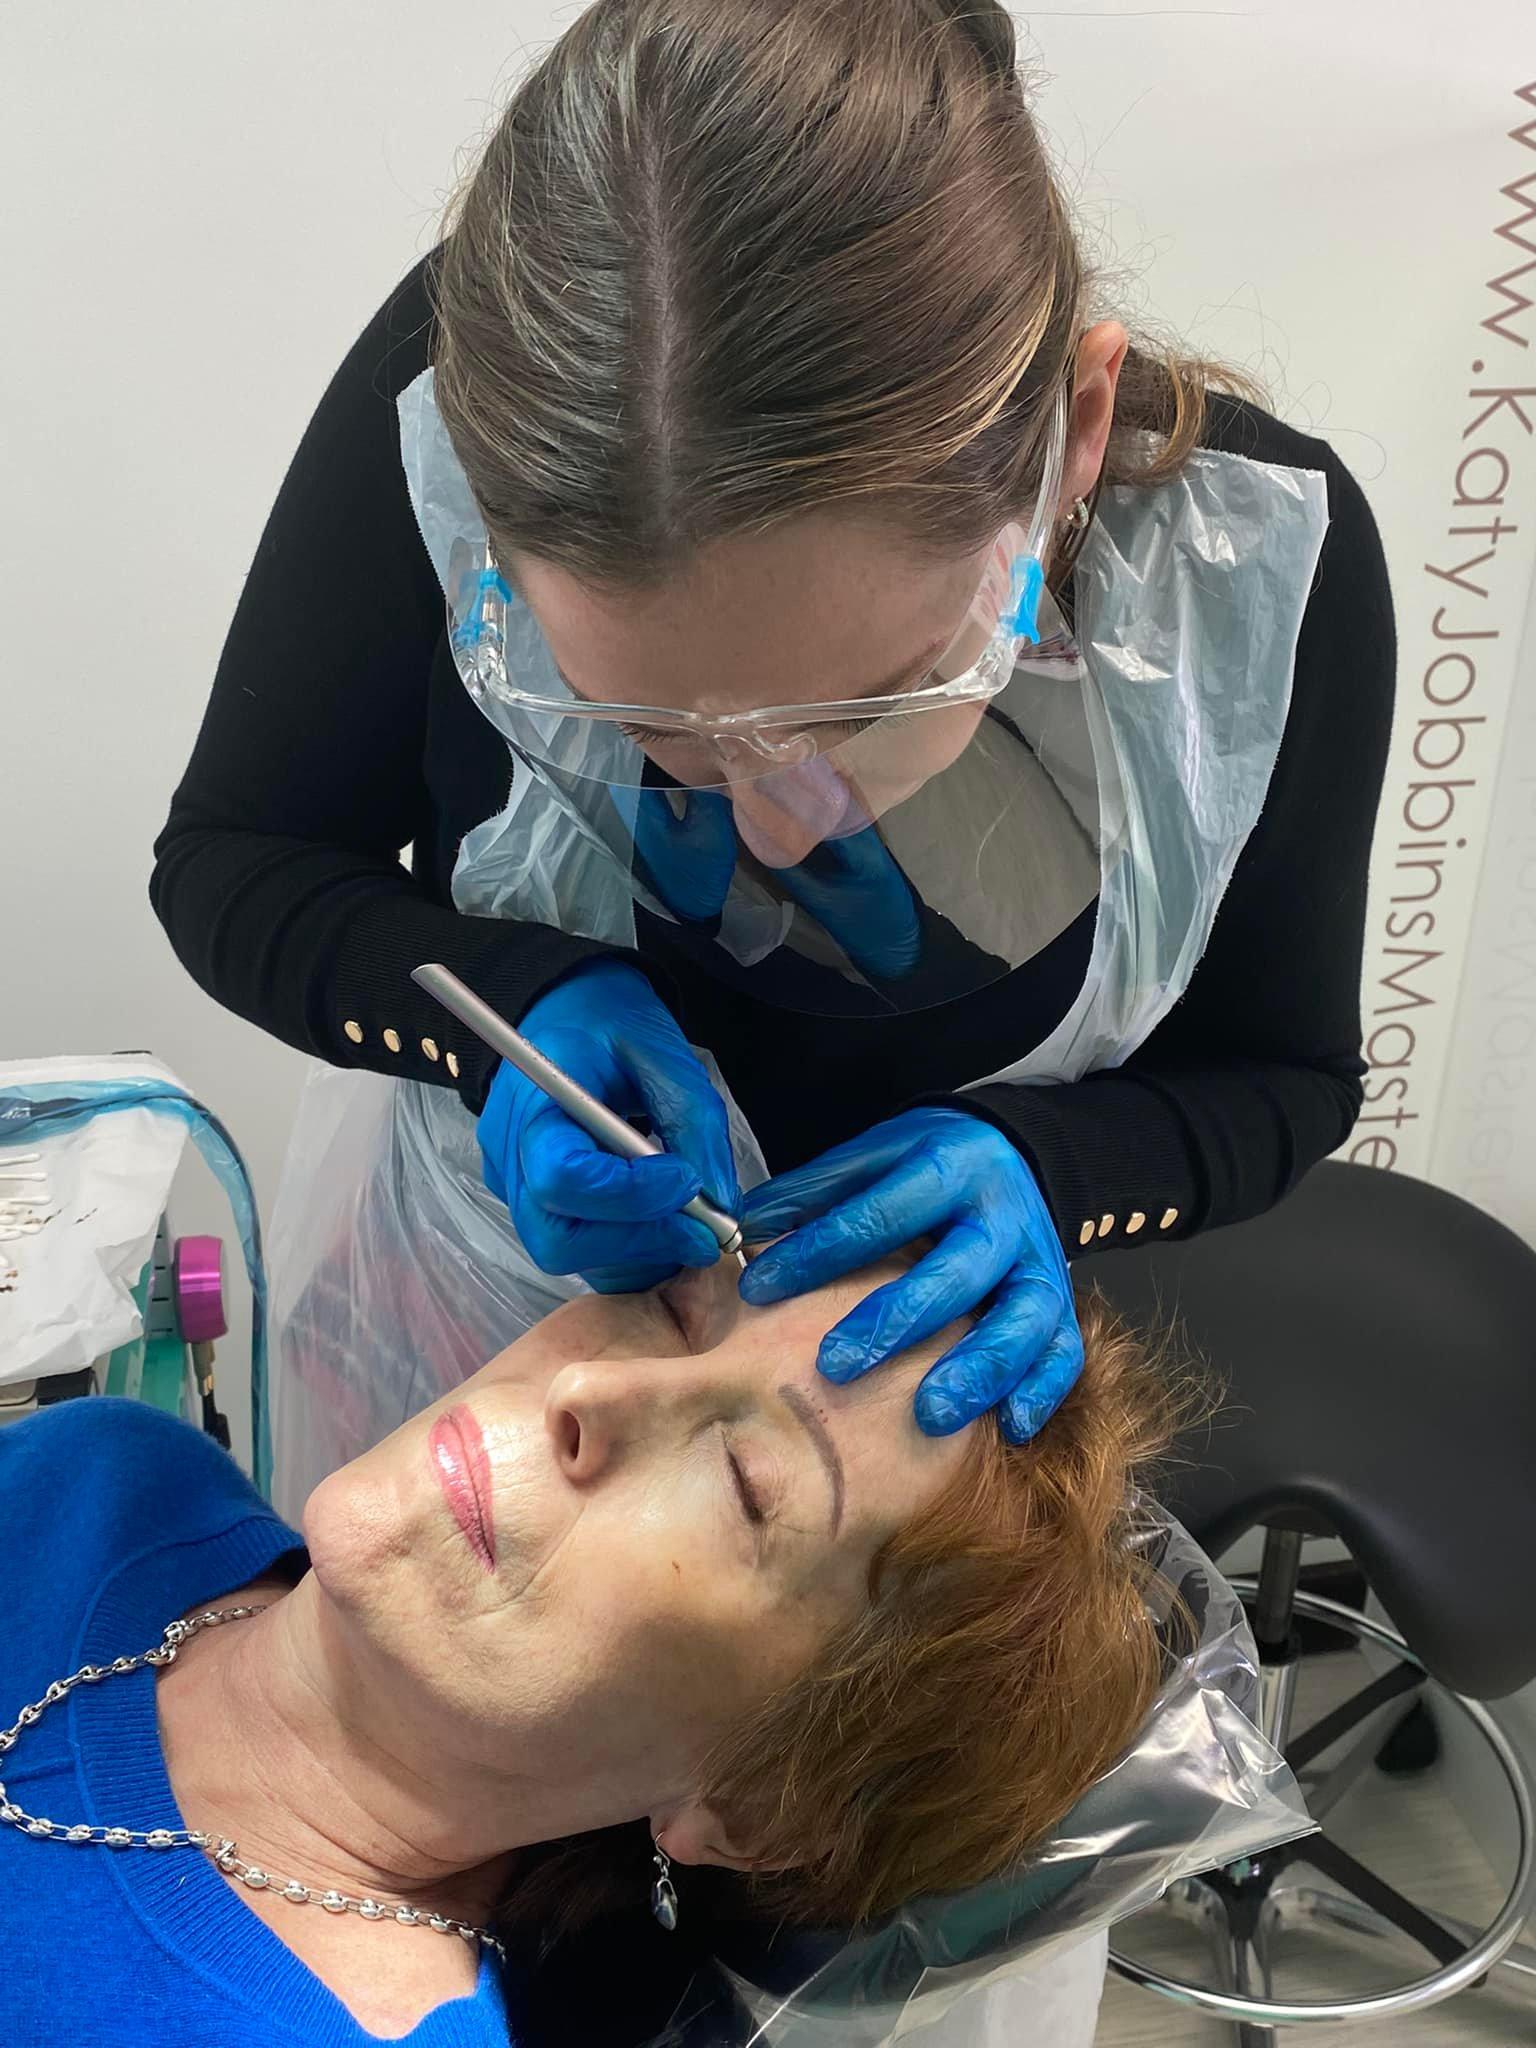 Julia microblading a clients brows